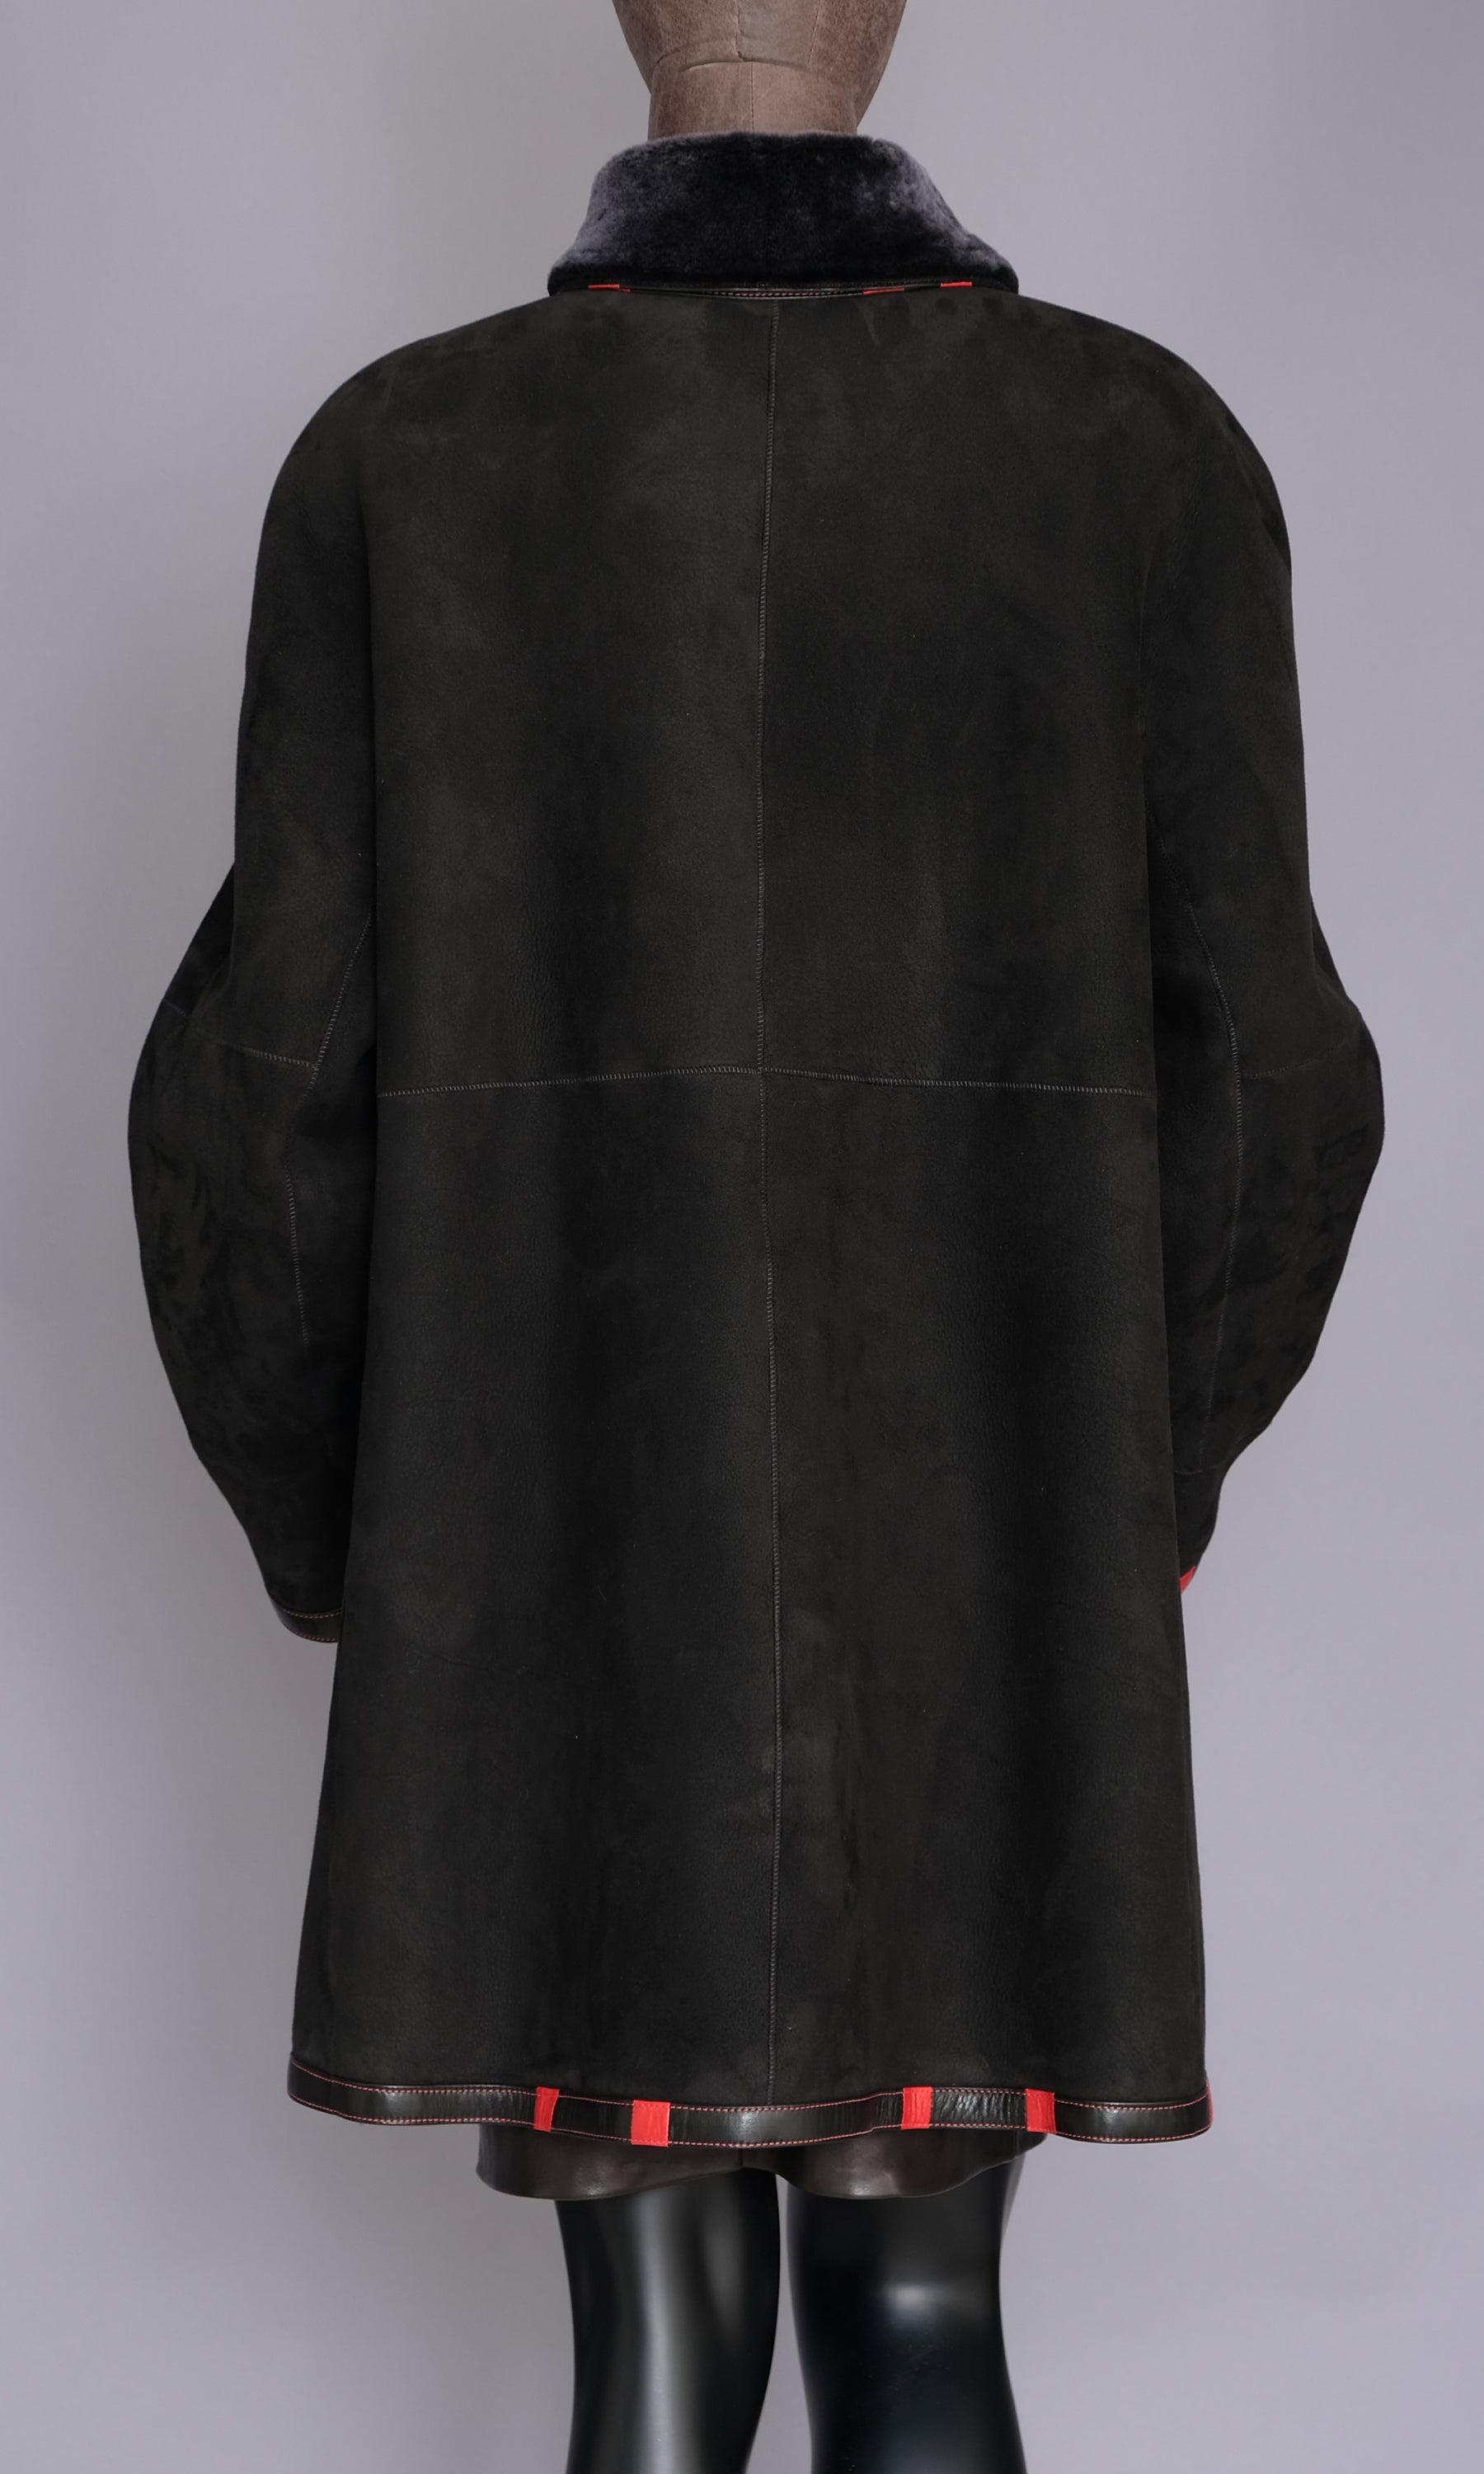 Black Shearling Swing Coat with Red trim size xxl